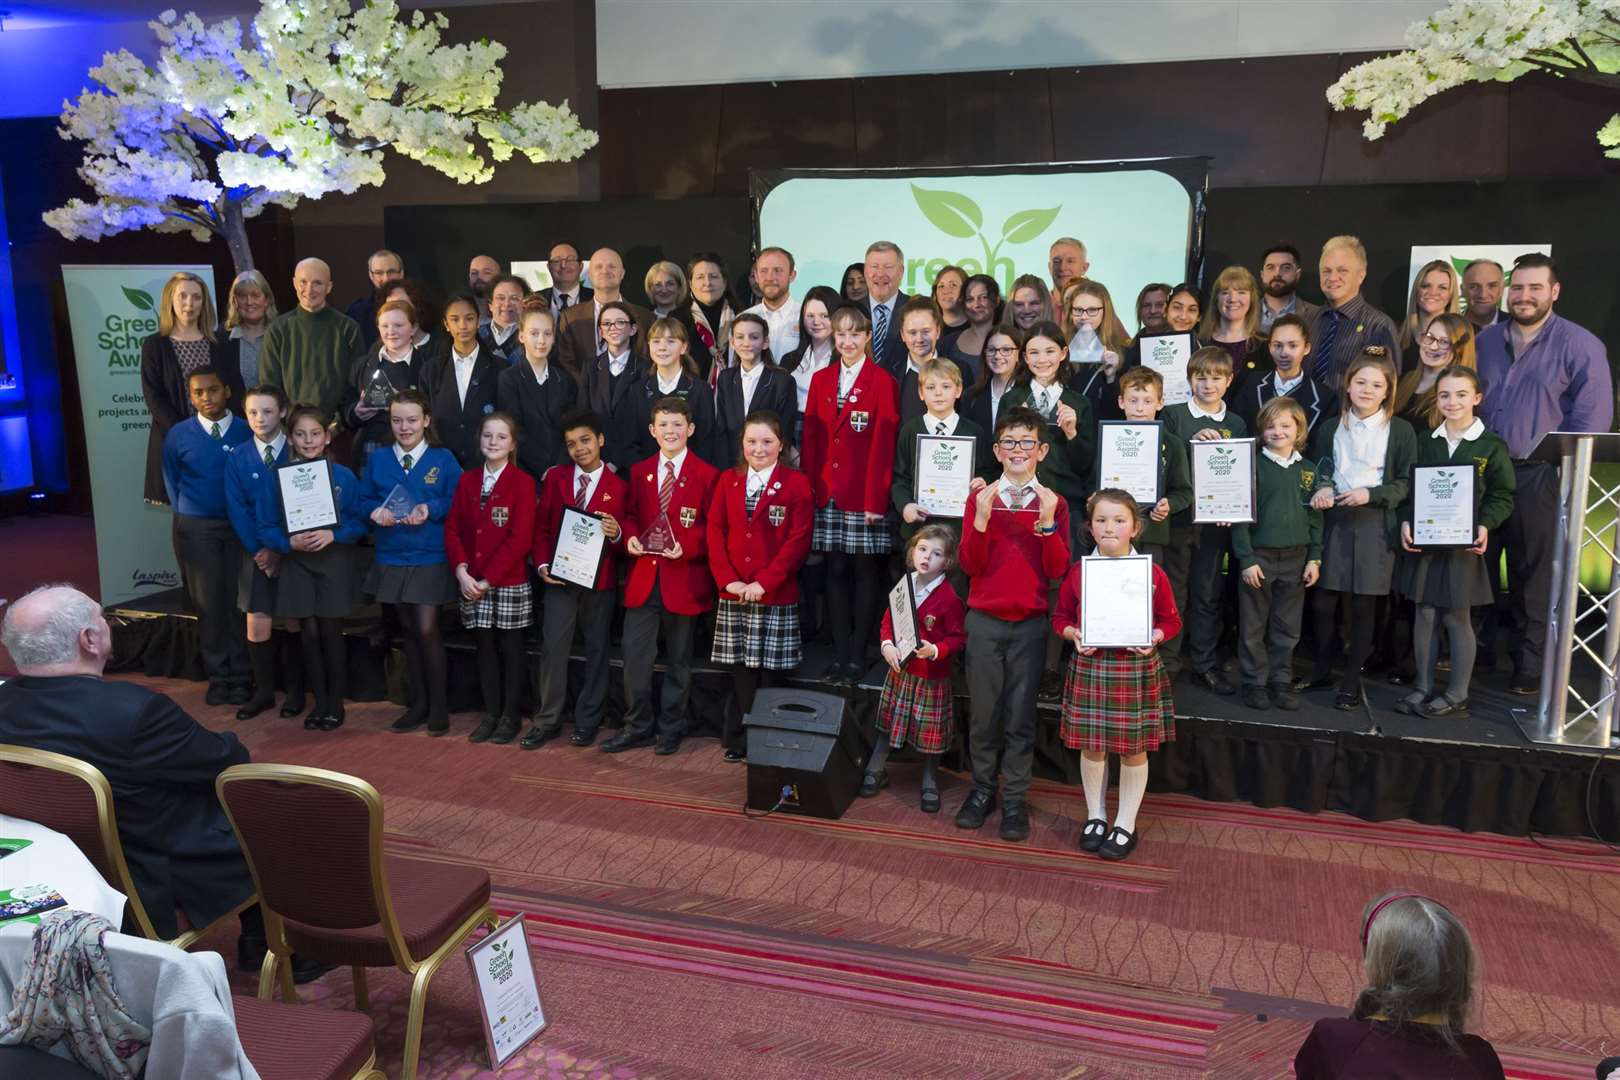 Winners and supporters celebrate at the Green School Awards at Ashford International Hotel.